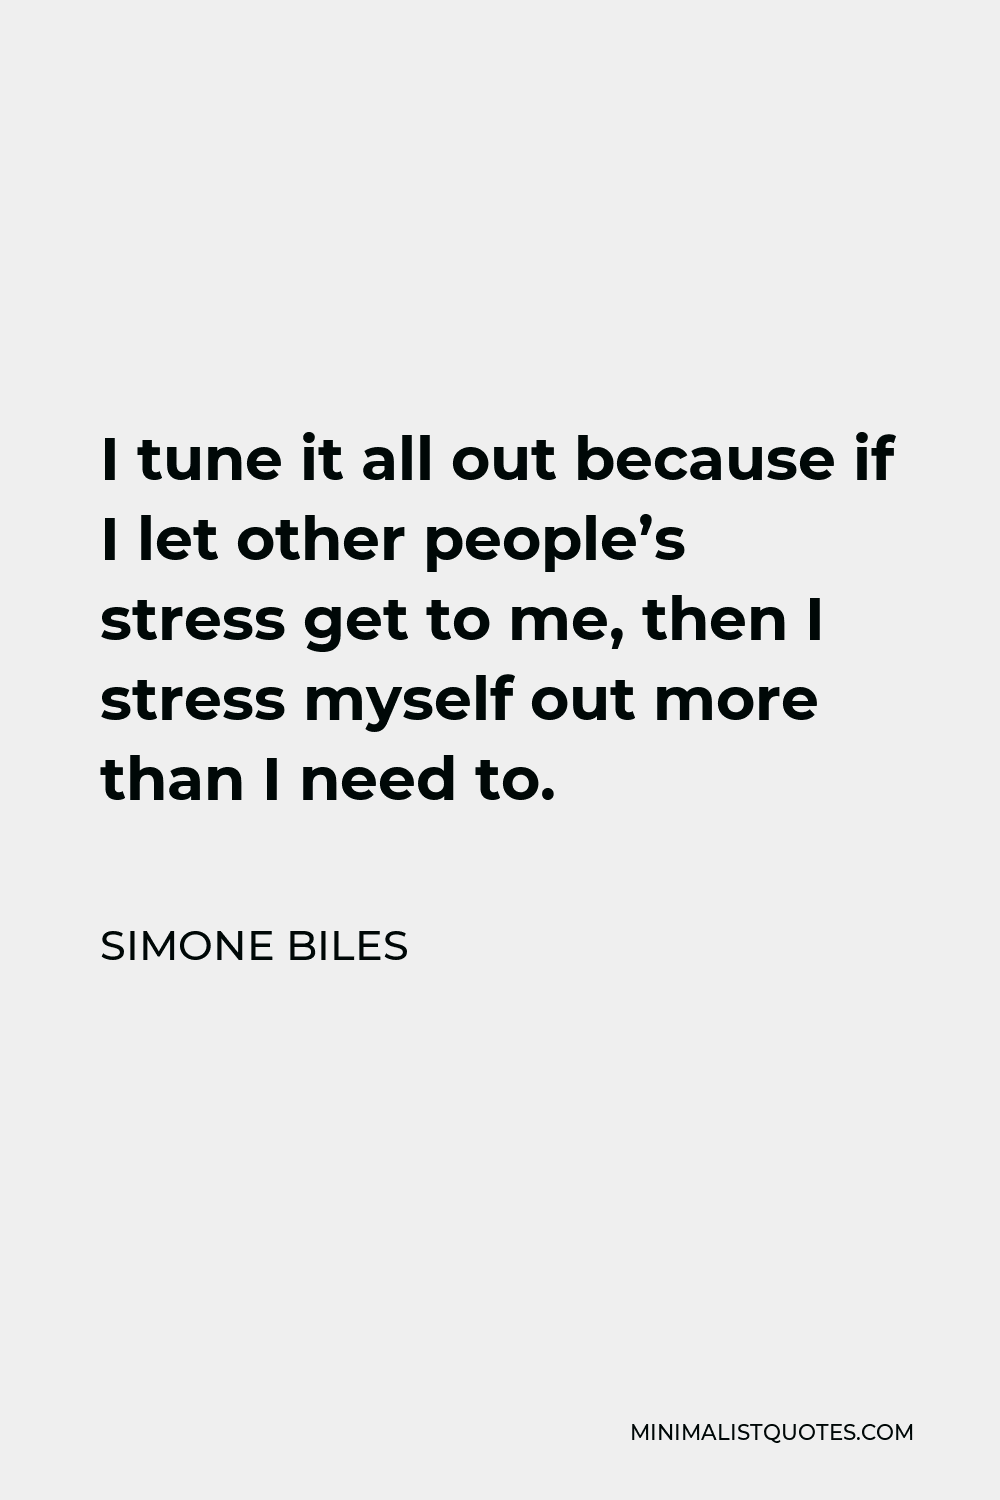 Simone Biles Quote - I tune it all out because if I let other people’s stress get to me, then I stress myself out more than I need to.